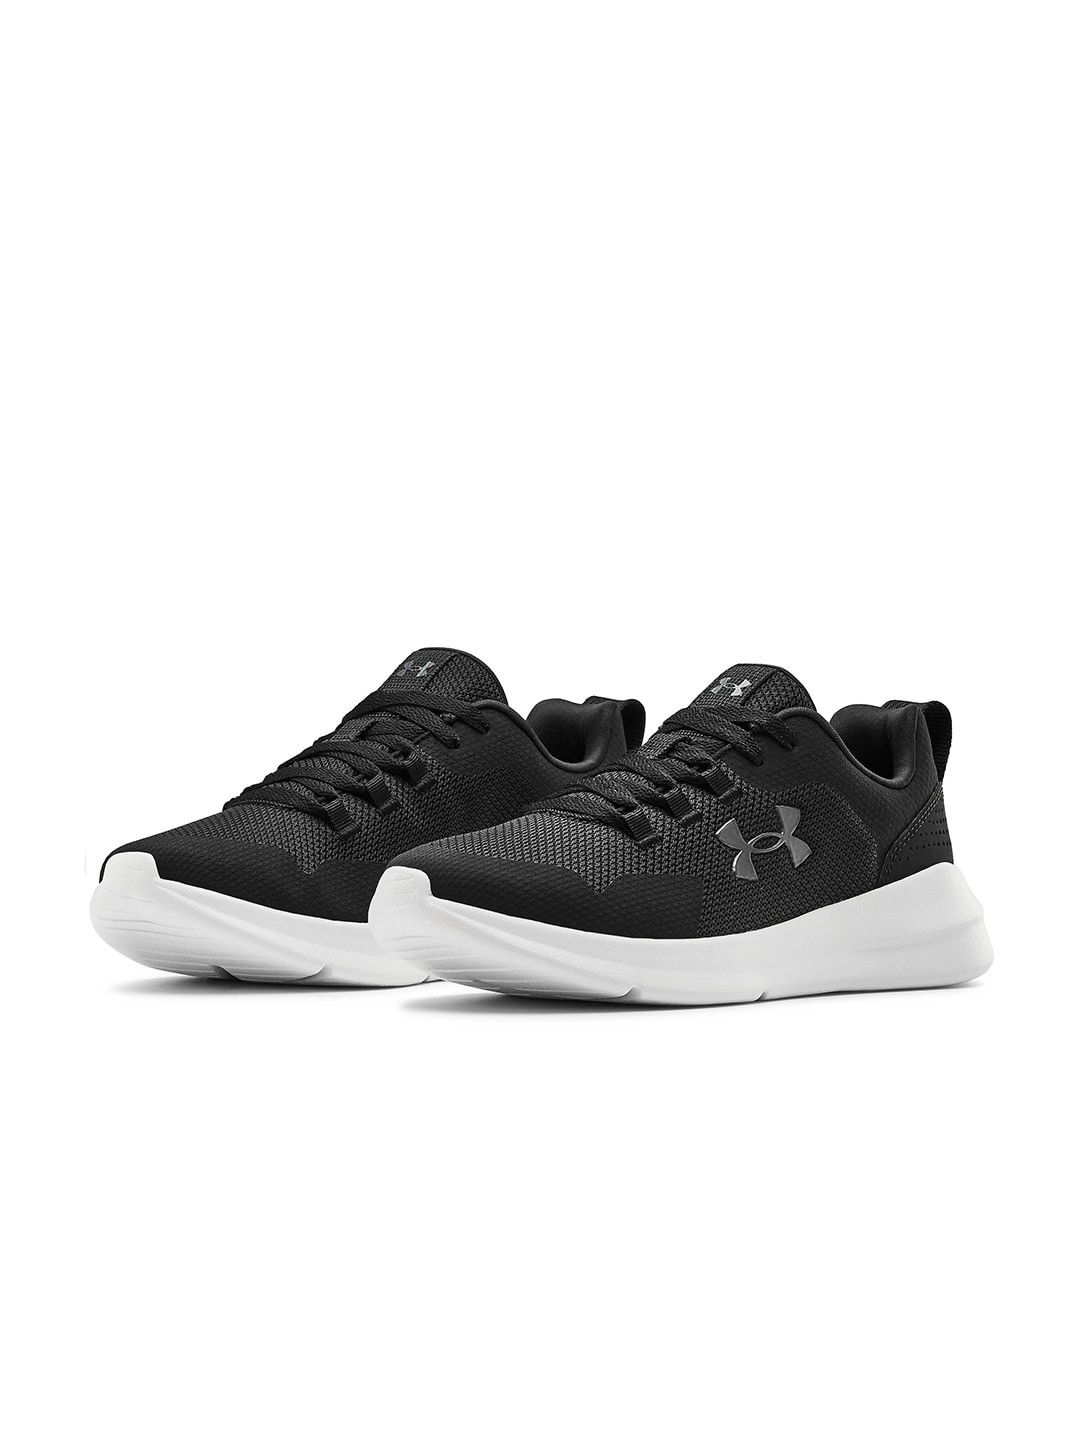 UNDER ARMOUR Women Black Essential Running Shoes Price in India